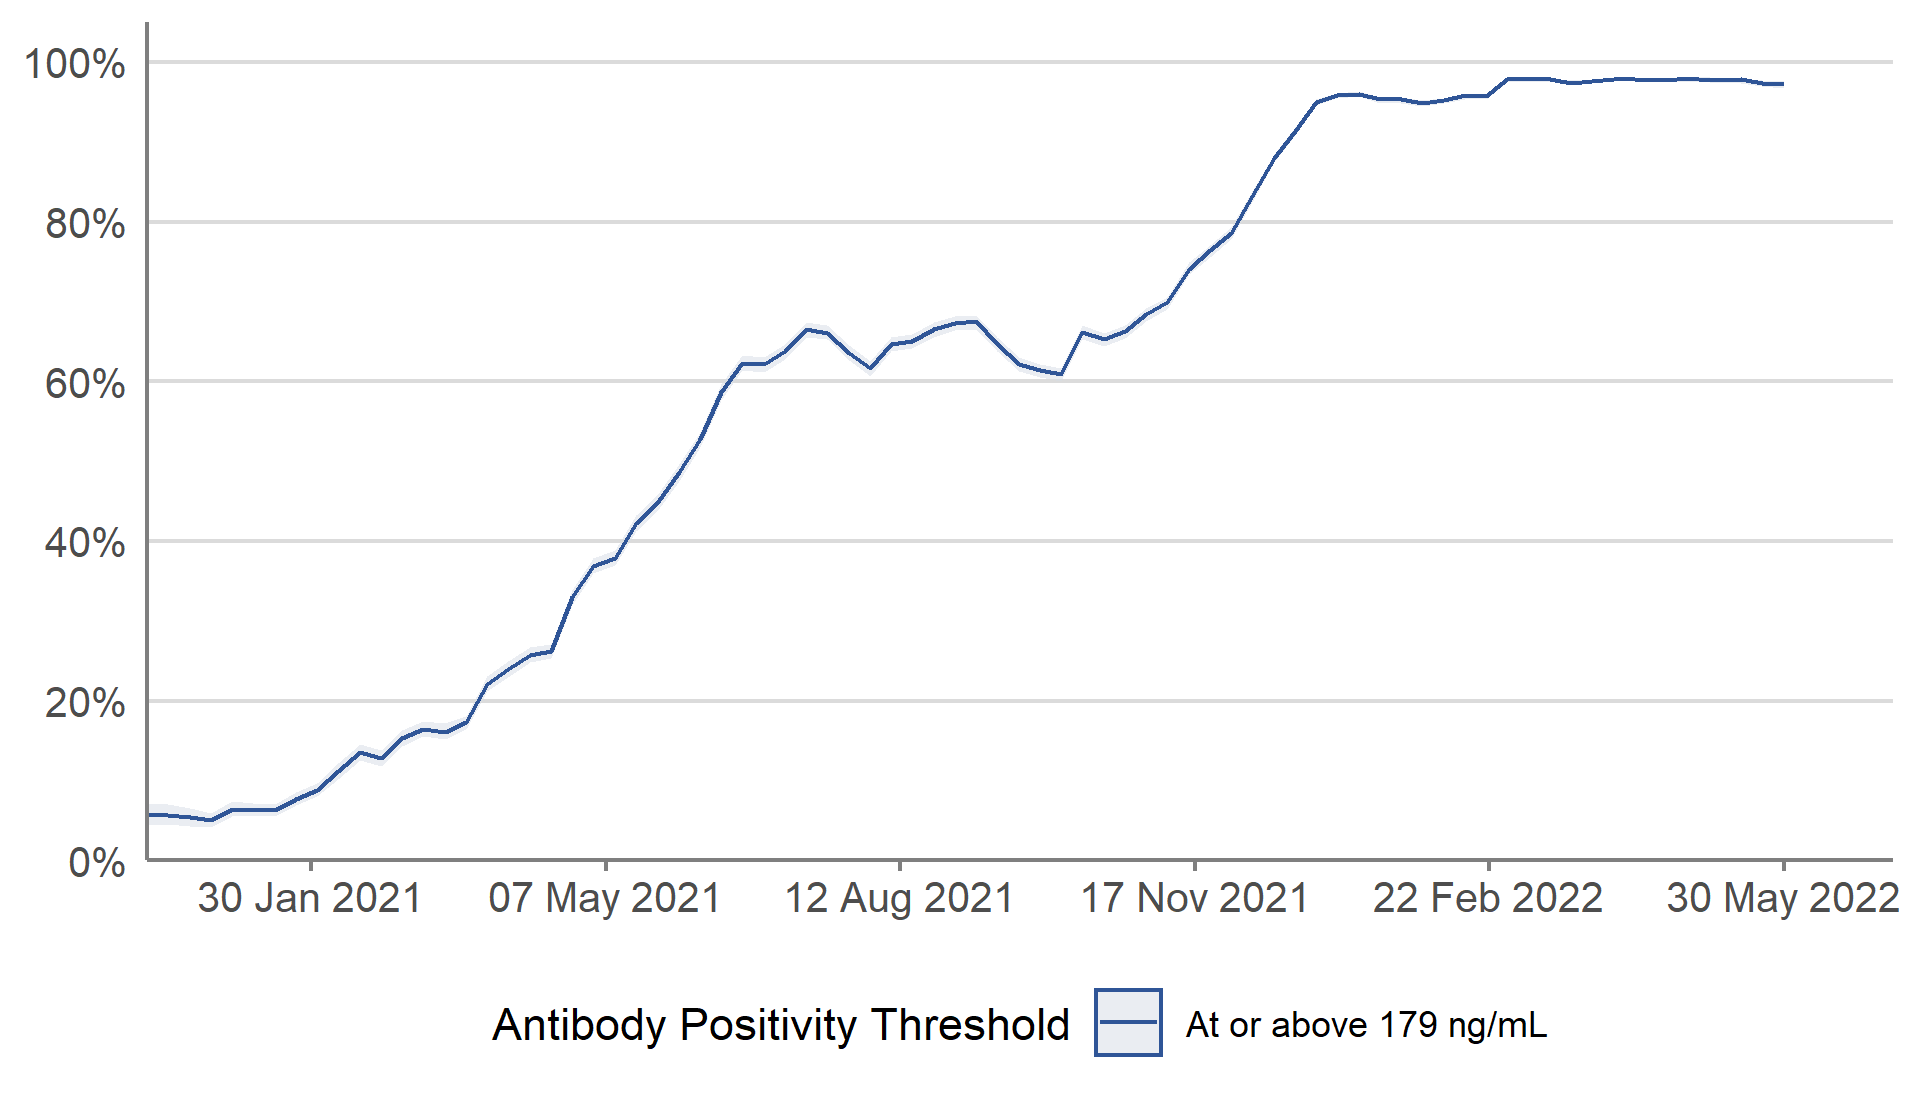 In recent weeks, antibody positivity at the 179 ng/mL level has continued to remain high in Scotland.